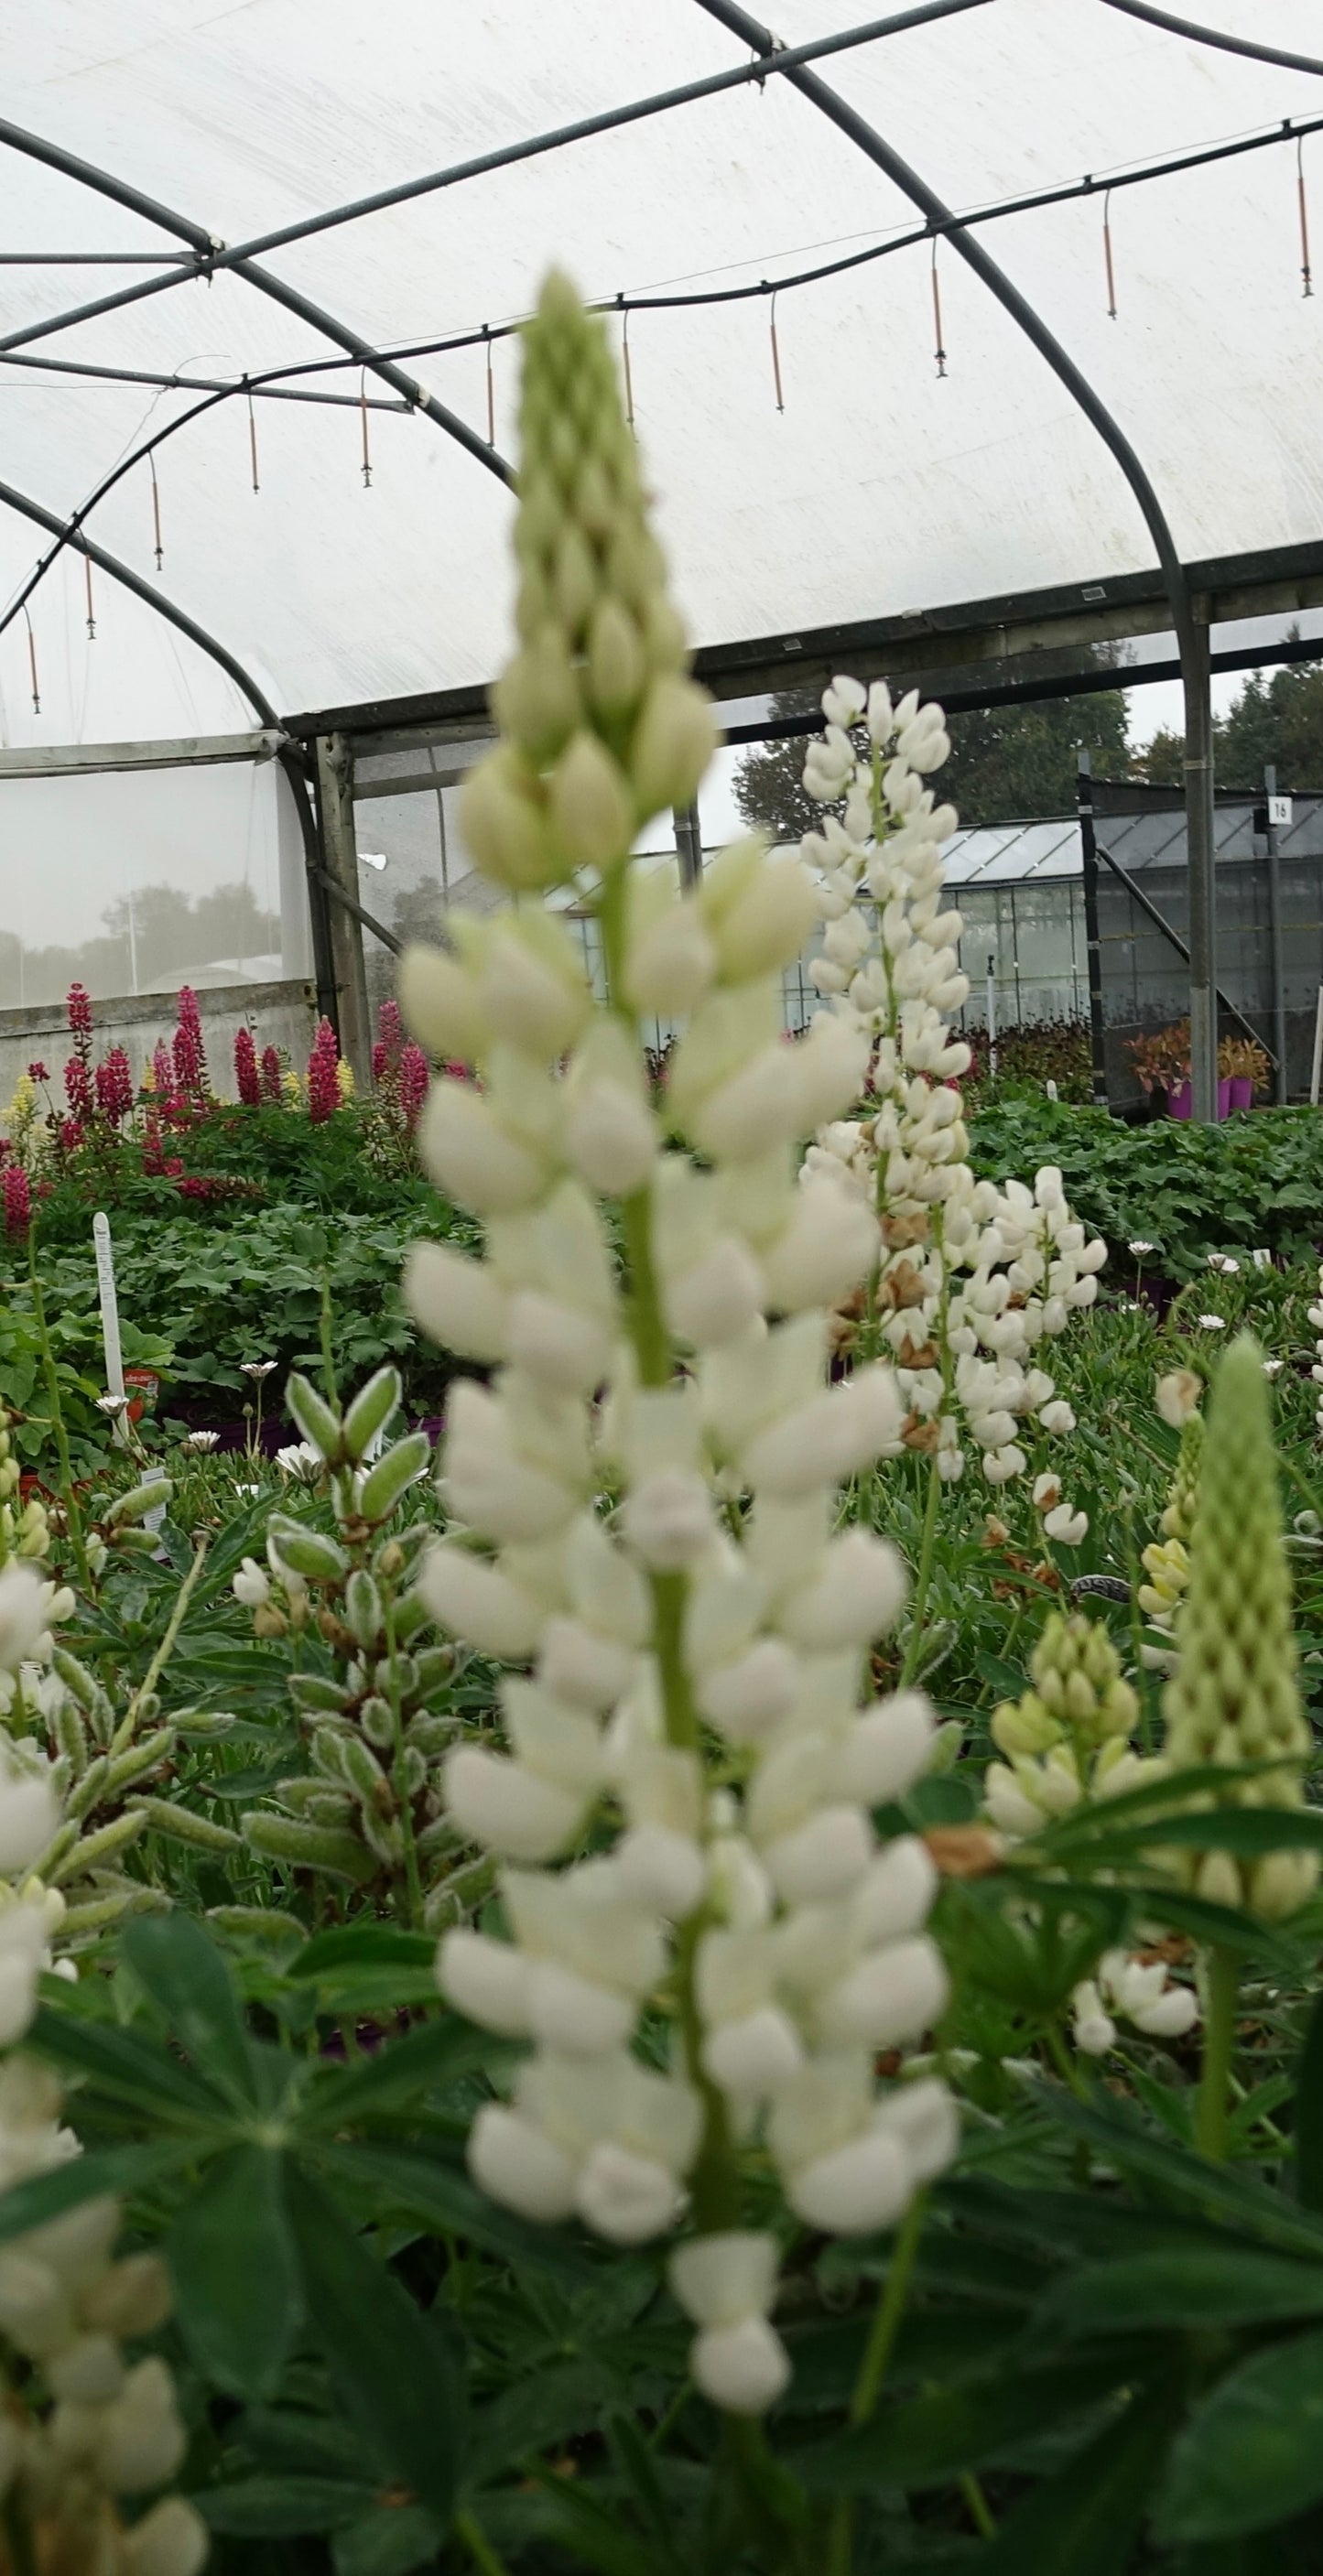 Lupin 'Gallery White'